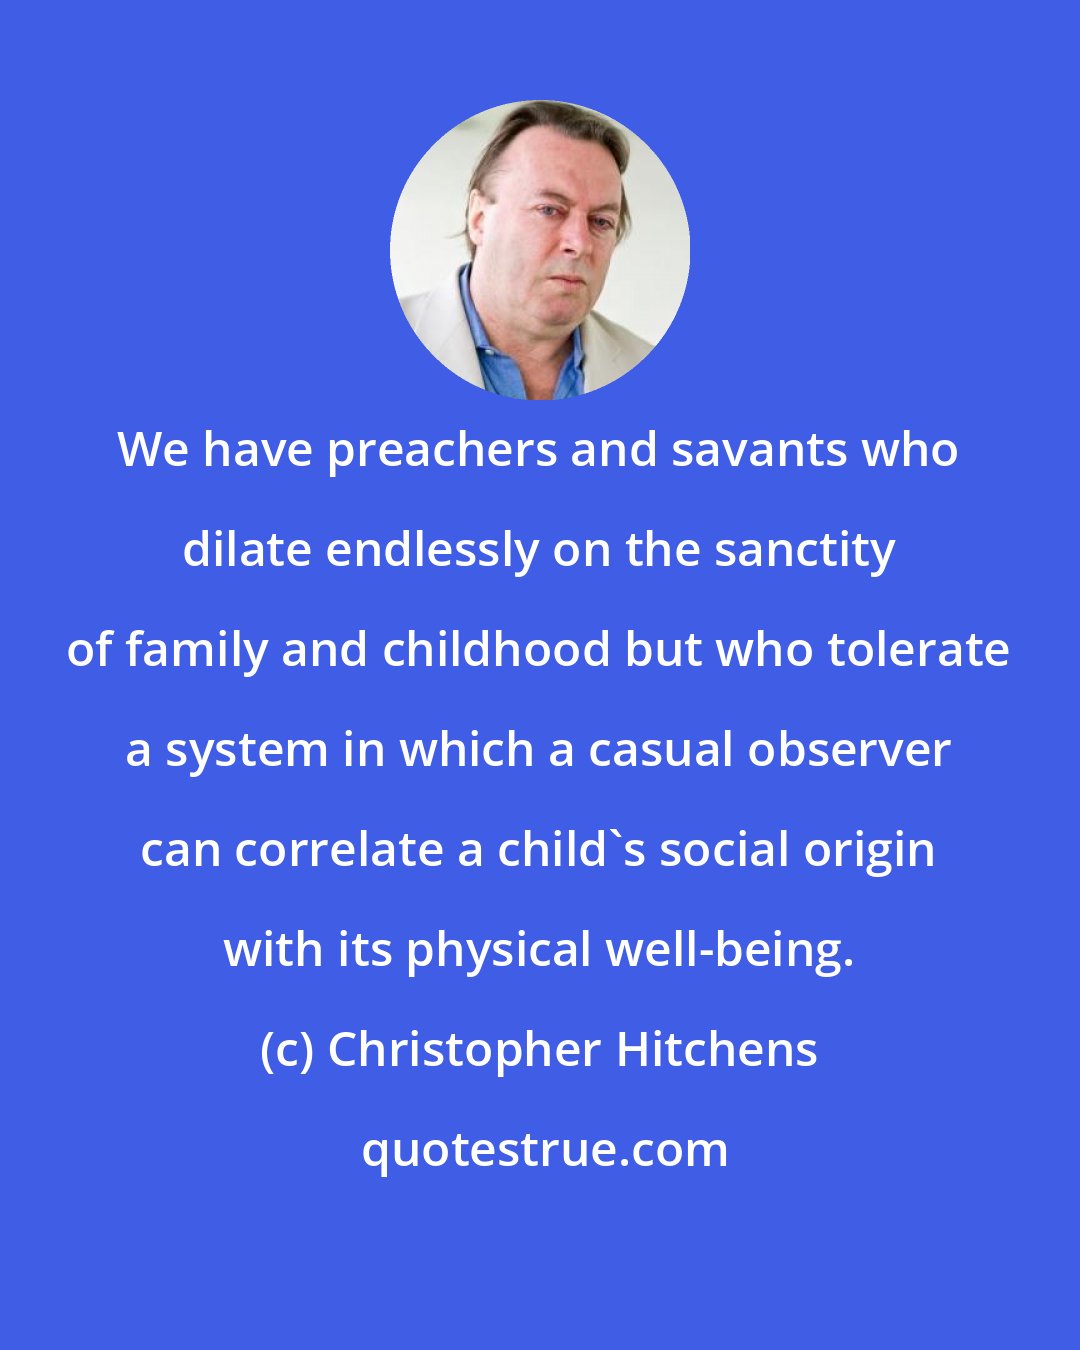 Christopher Hitchens: We have preachers and savants who dilate endlessly on the sanctity of family and childhood but who tolerate a system in which a casual observer can correlate a child's social origin with its physical well-being.